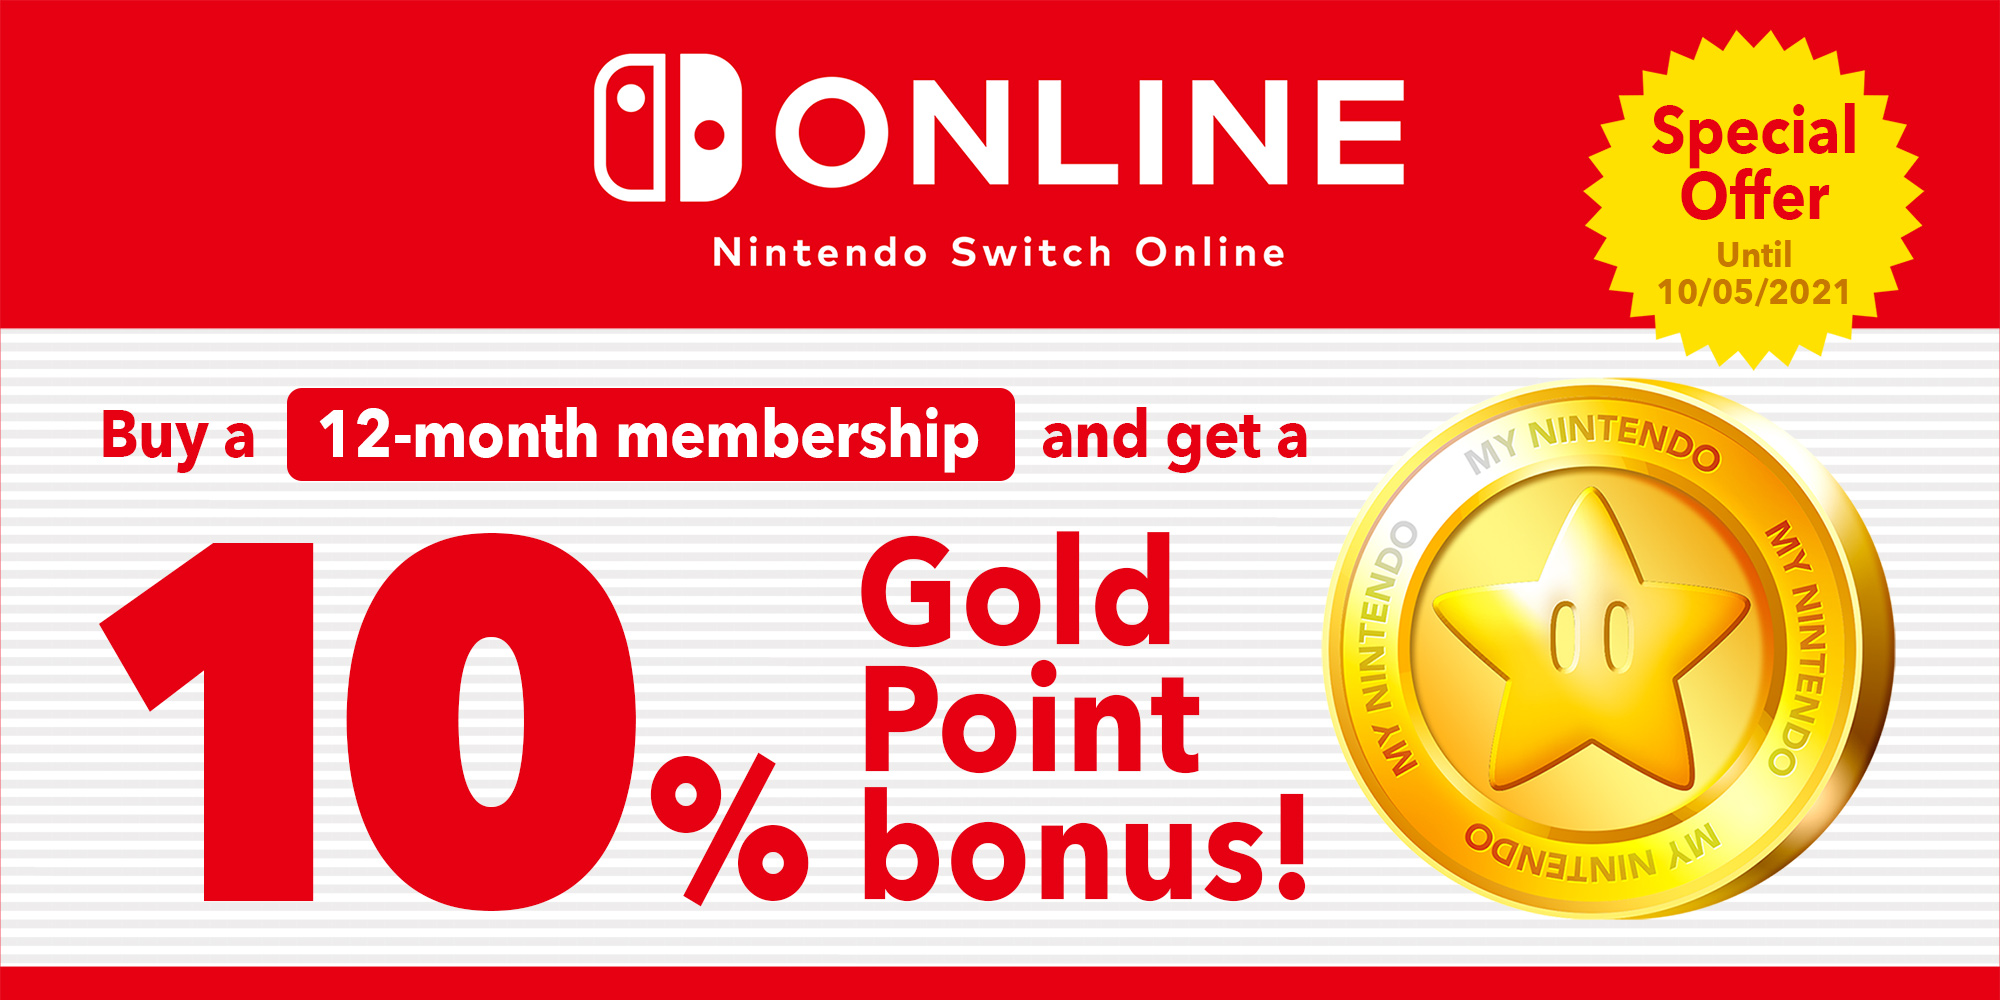 Special offer: Earn up to R46.00 in Gold Points with a 12-month Nintendo Switch Online membership!